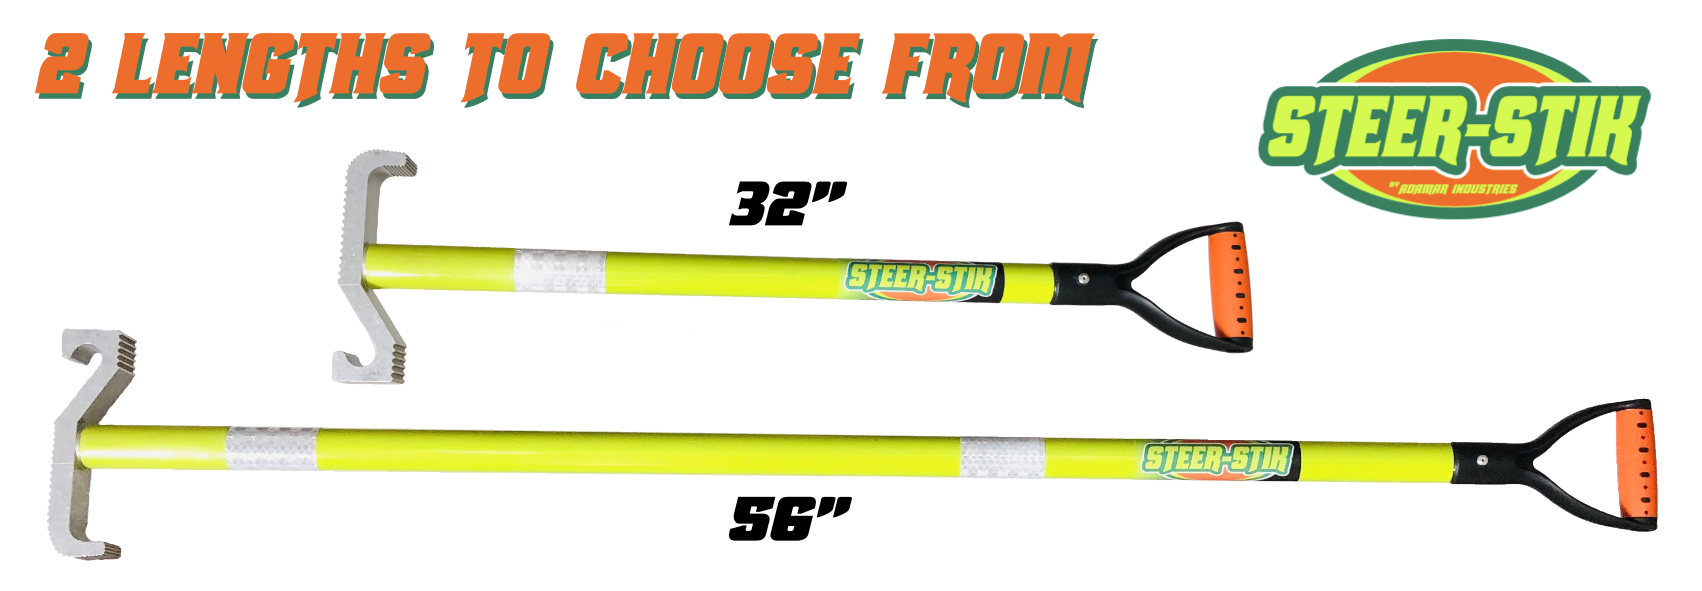 Grappler 18 - Hook Tool. Lightweight Hand Safety Tool Used To Hook, Pick,  Push, Pull, Guide and Control. Material handling tools. Use It On Chain,  Wire Rope, Suspended Loads, Rigging, Pipes, Chain